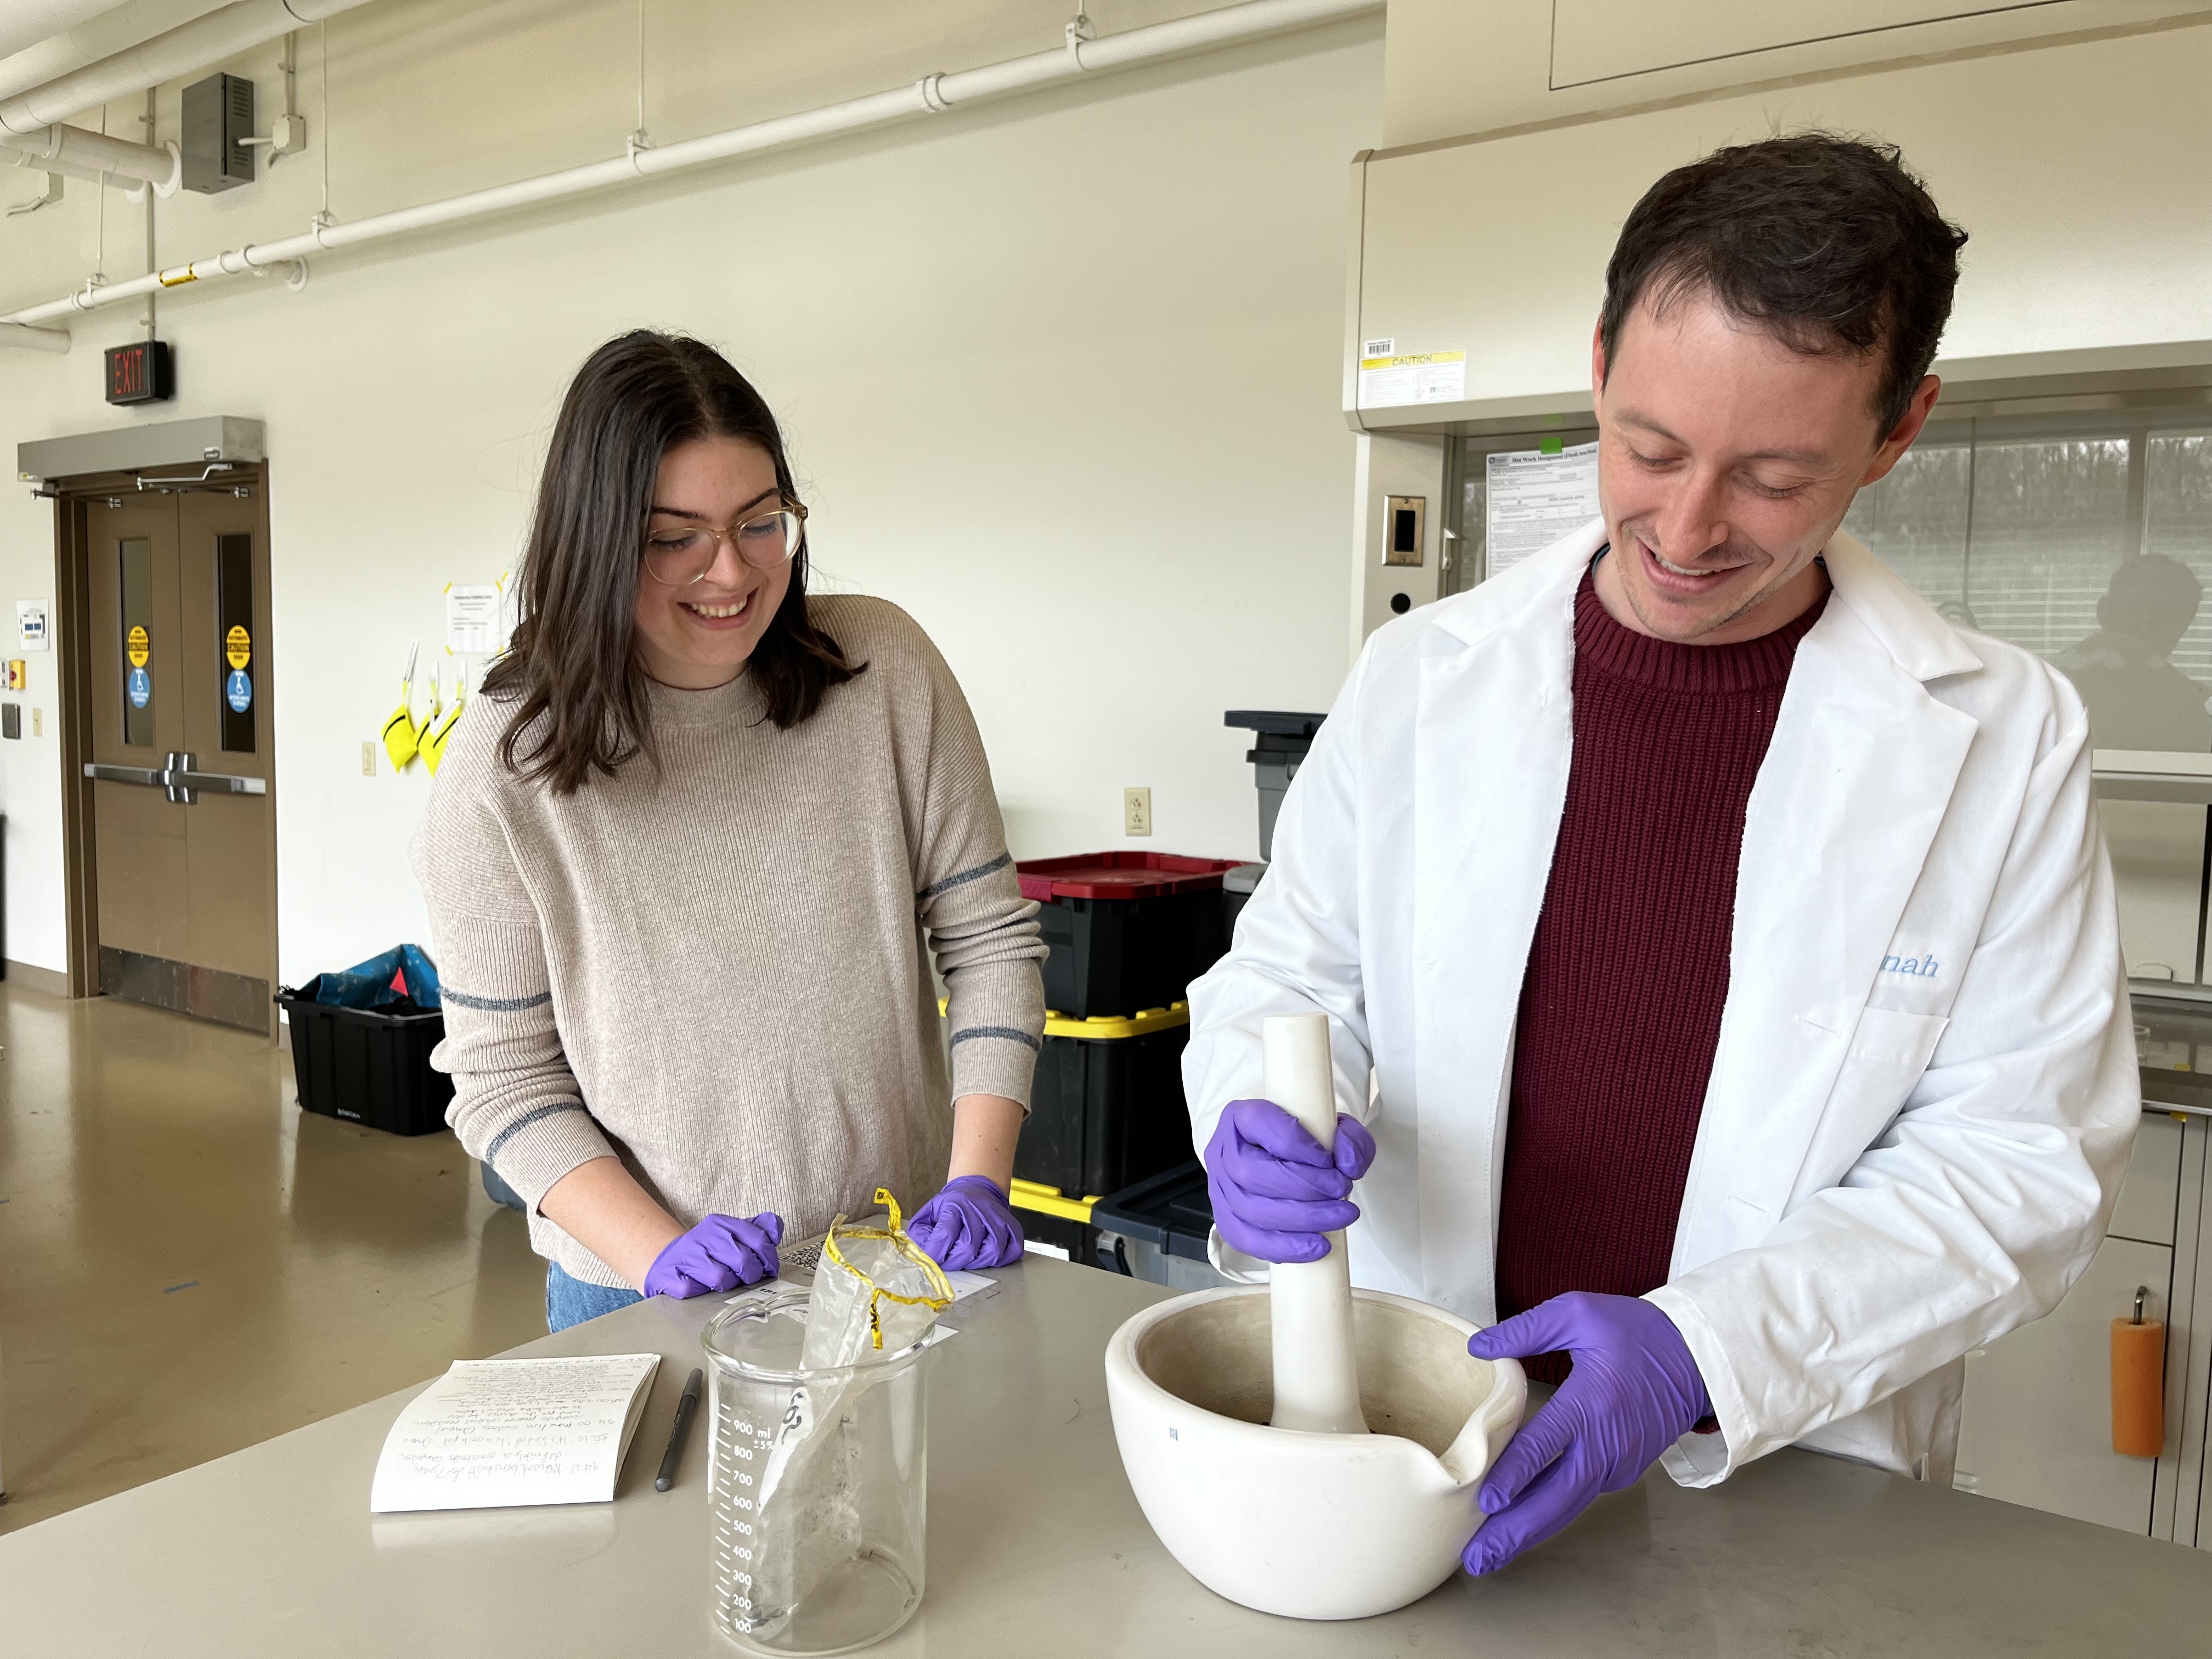 Two scientists in purple gloves stand beside a lab table. One is grinding a sample in a white bowl while the other looks on and smiles.